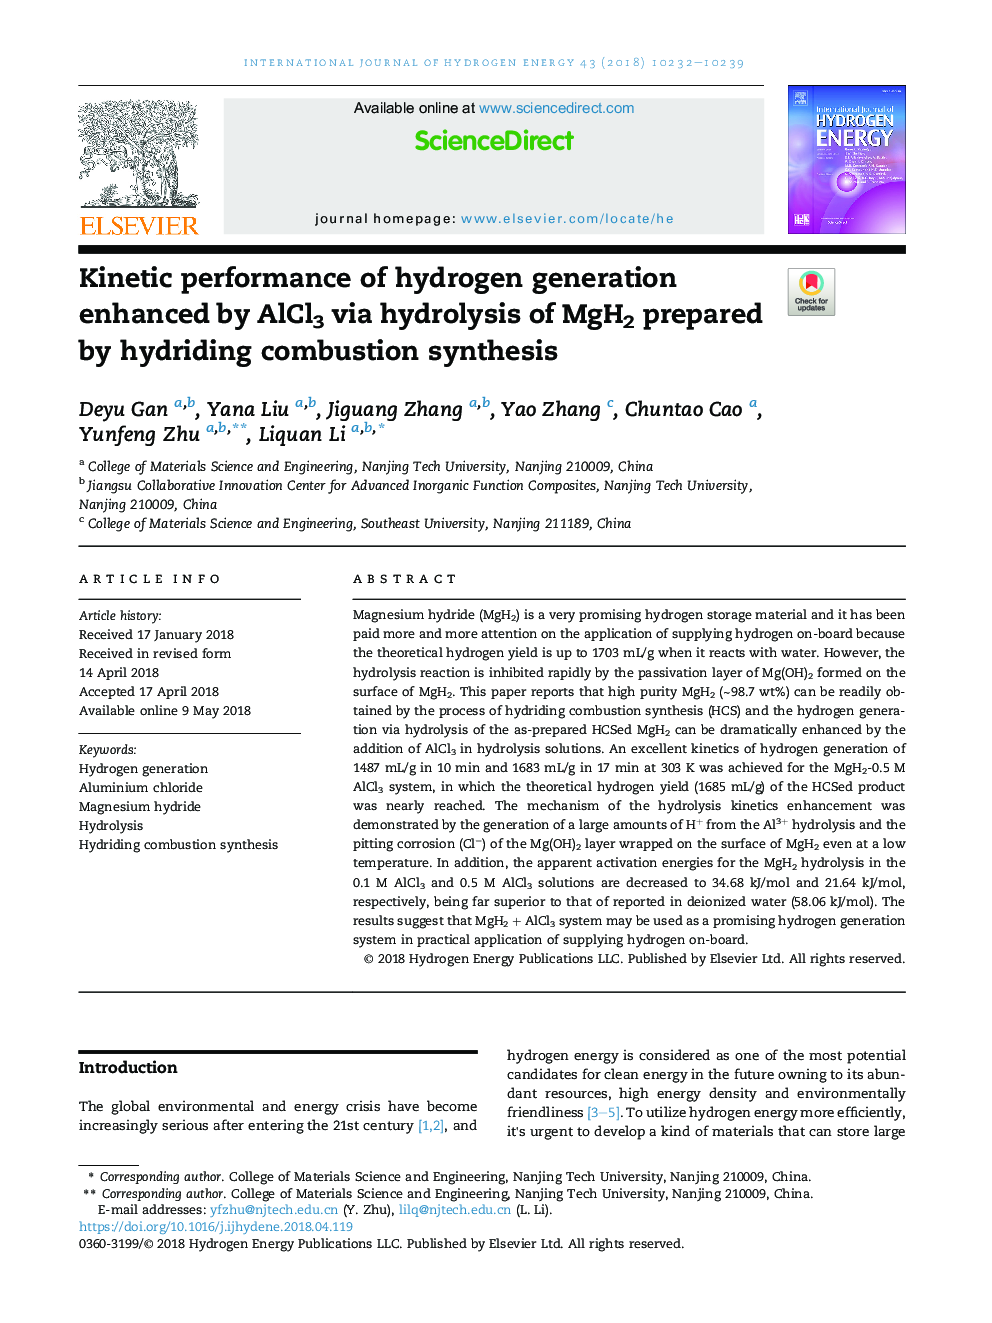 Kinetic performance of hydrogen generation enhanced by AlCl3 via hydrolysis of MgH2 prepared by hydriding combustion synthesis